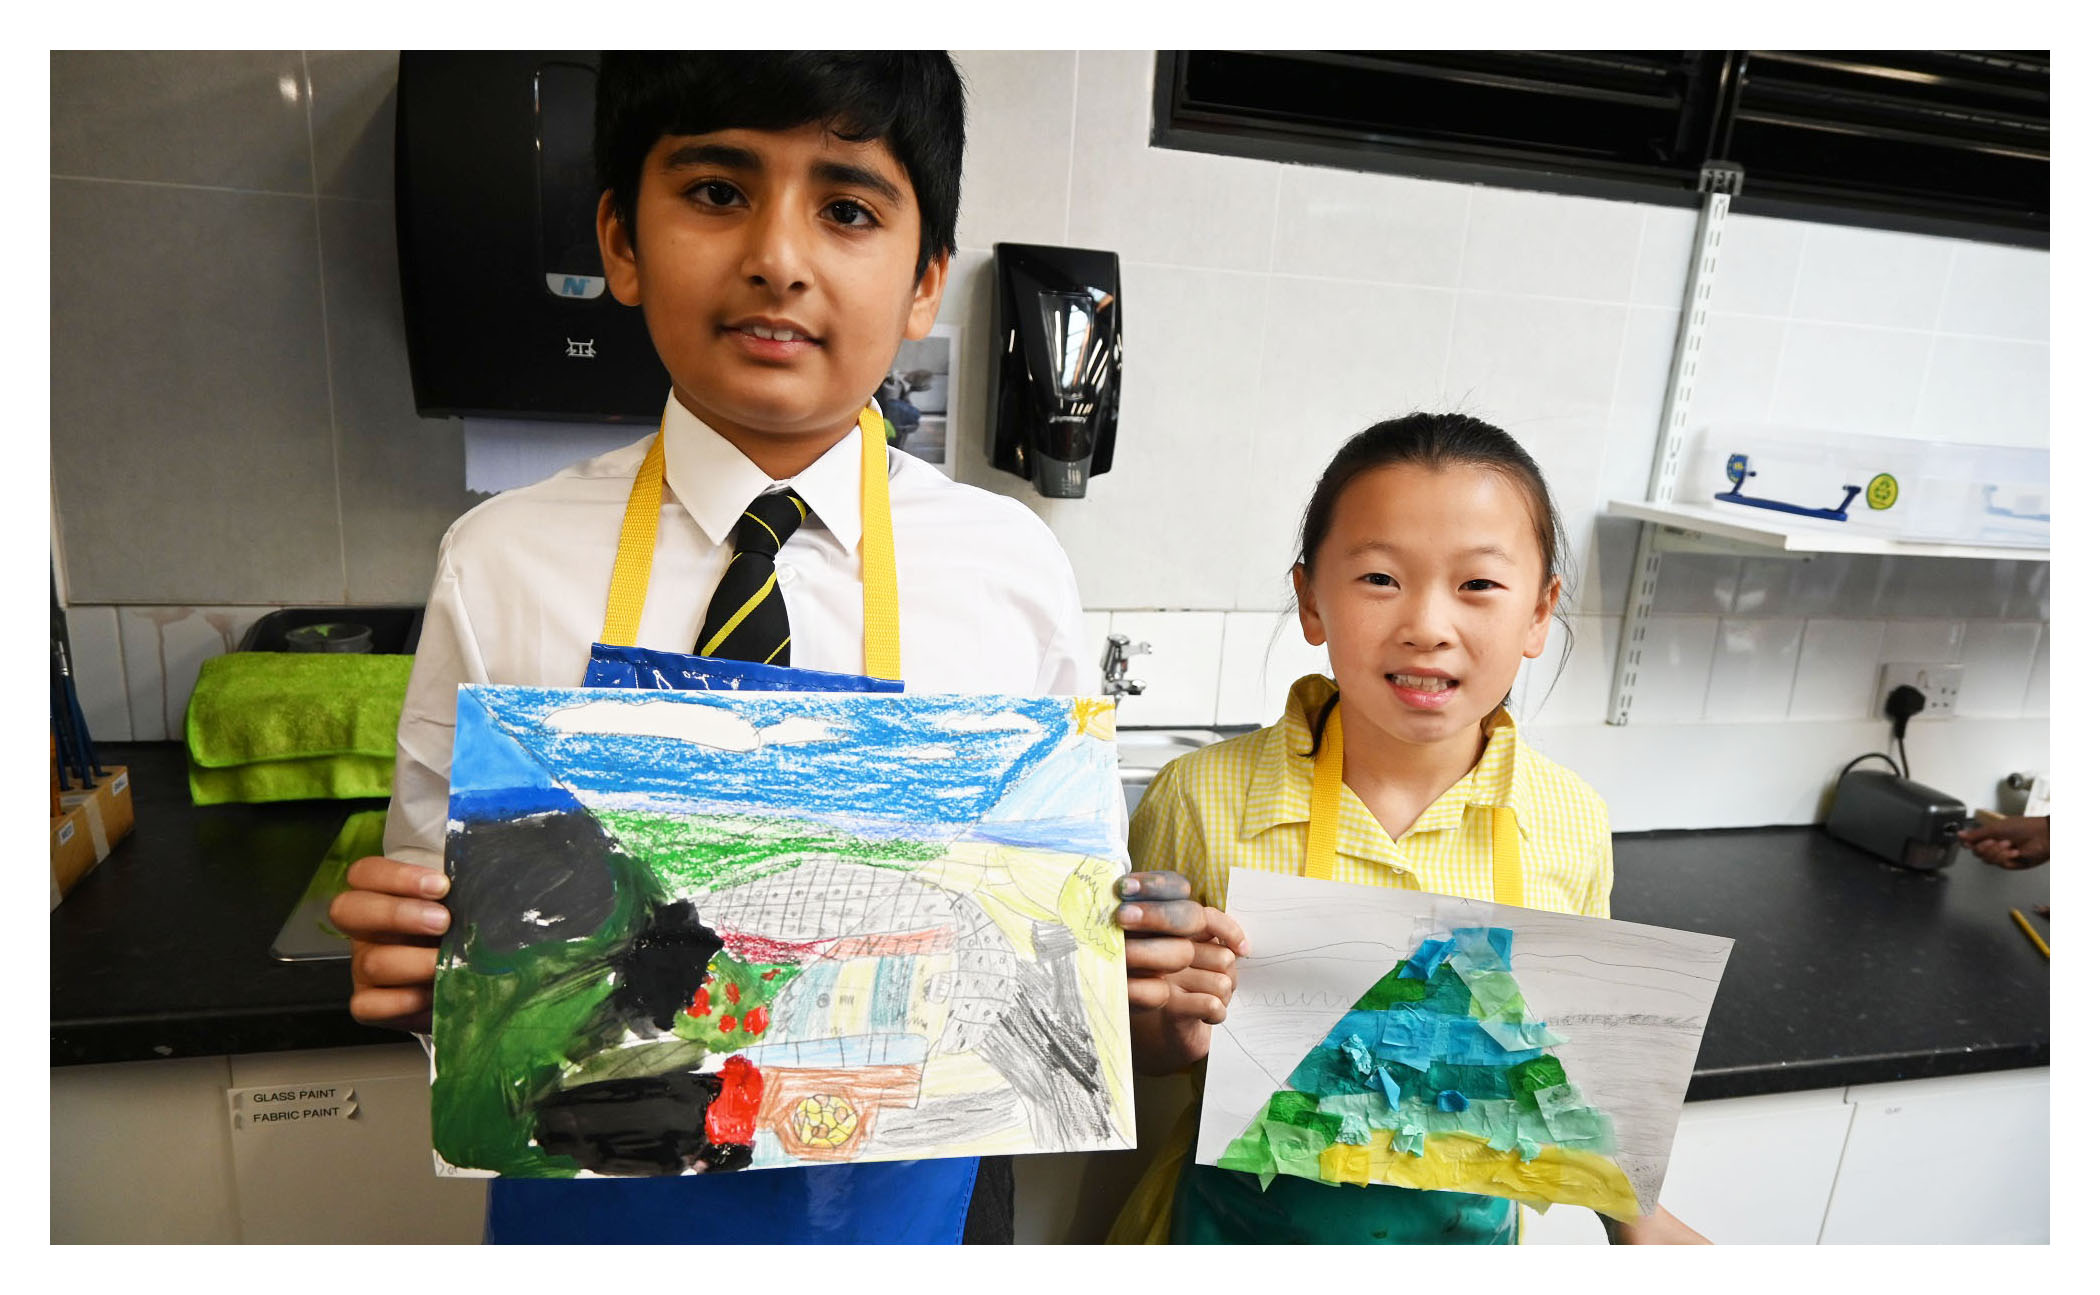 Junior School pupils with their completed artwork following a workshop